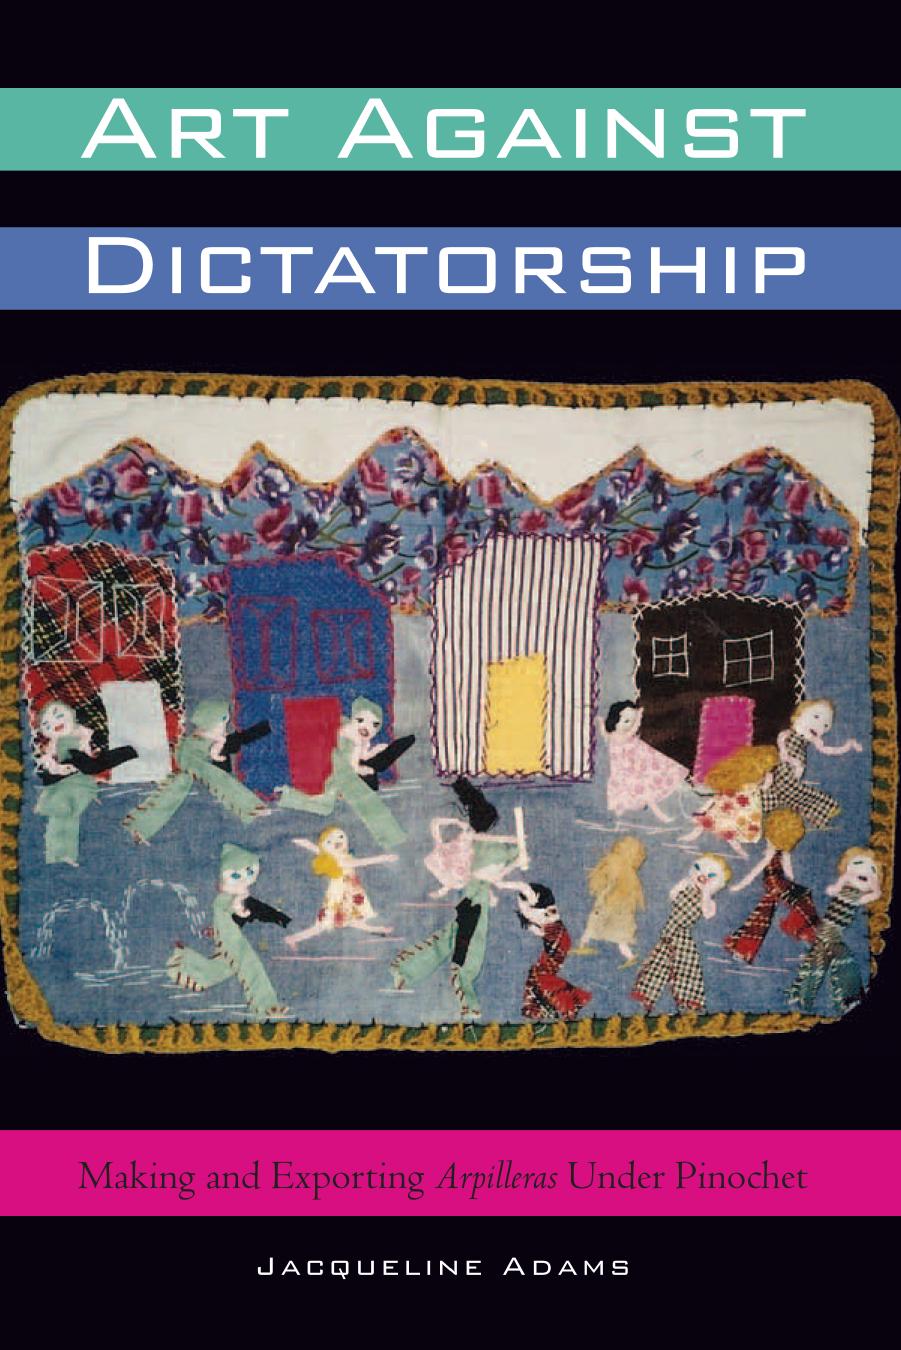 Art Against Dictatorship: Making and Exporting Arpilleras under Pinochet by Jacqueline Adams